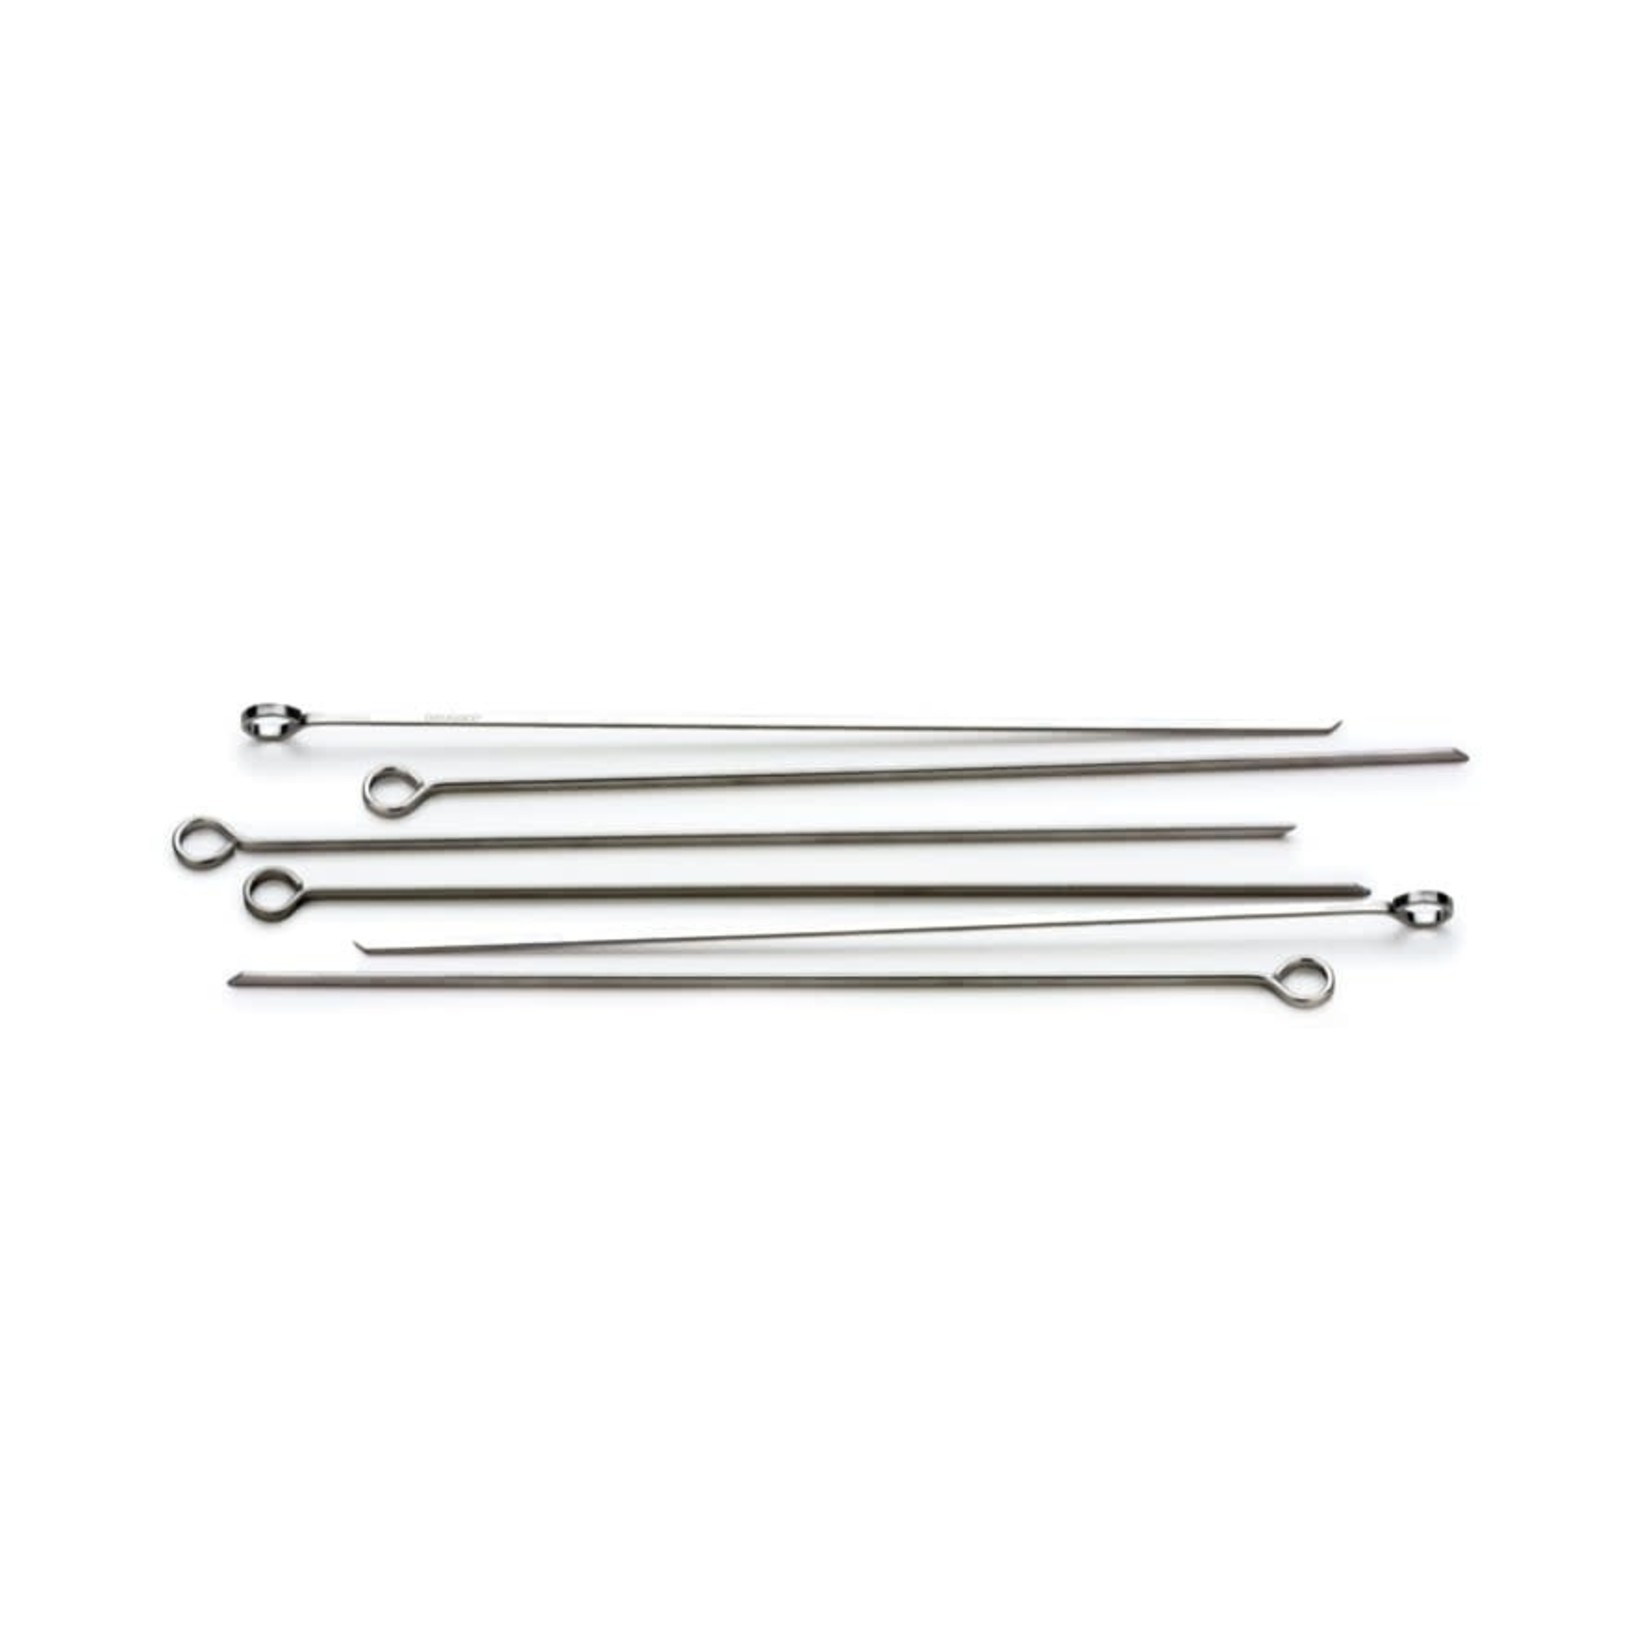 RSVP RSVP BBQ Skewers S/6 - Stainless